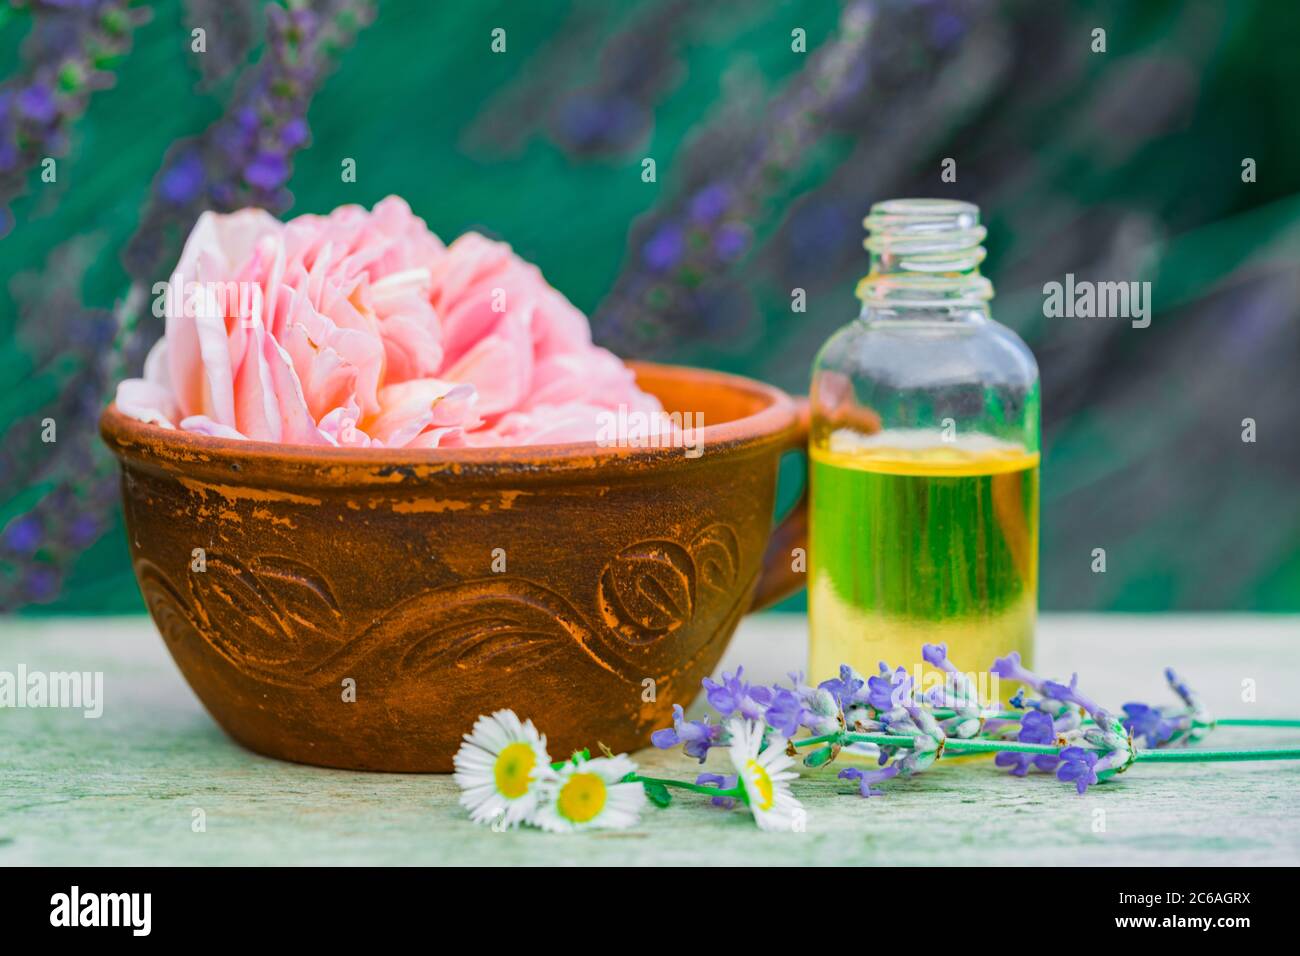 Thai Foot Massage Alternative Medicine Therapy With Thai Herb Aroma Oil Background For Spa Or